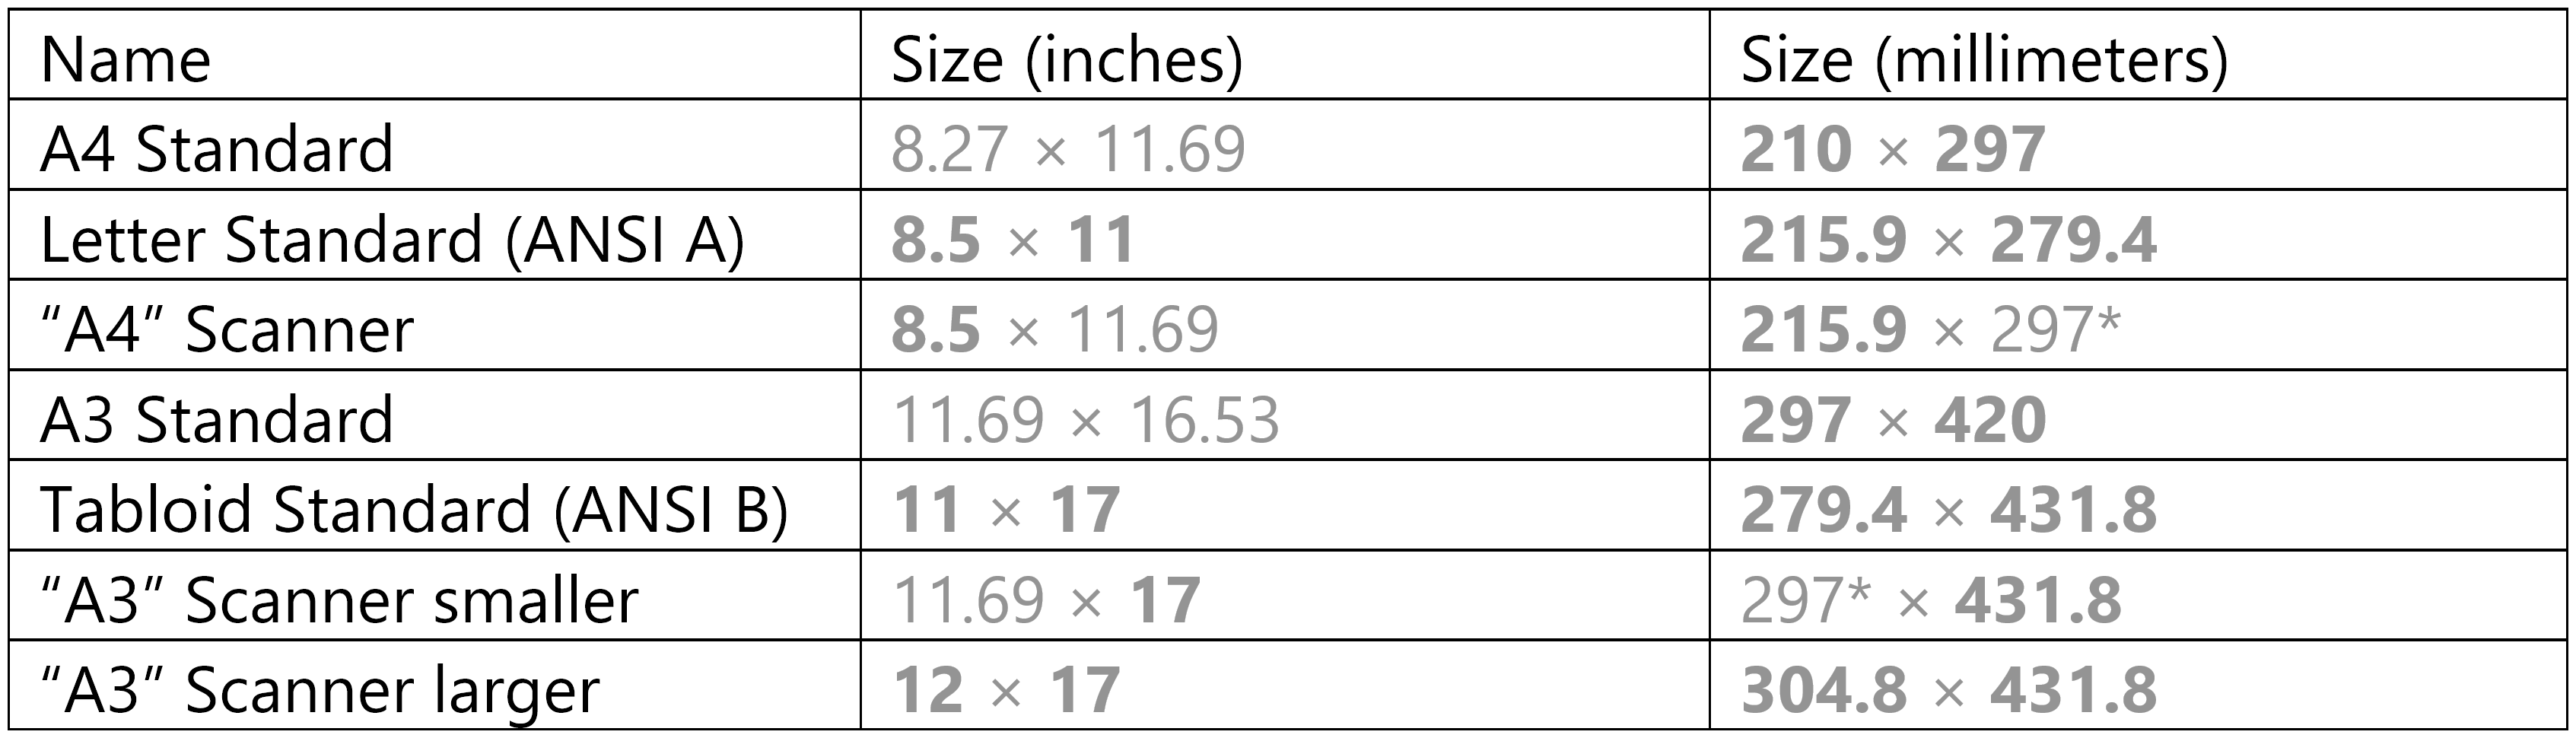 Dimensions of standard paper sizes and scanners. Numbers in bold are exact, and numbers not bolded are rounded. *Scanner pixel density is typically measured in pixels per inch, which makes it difficult to comply with a millimeter standard.5.